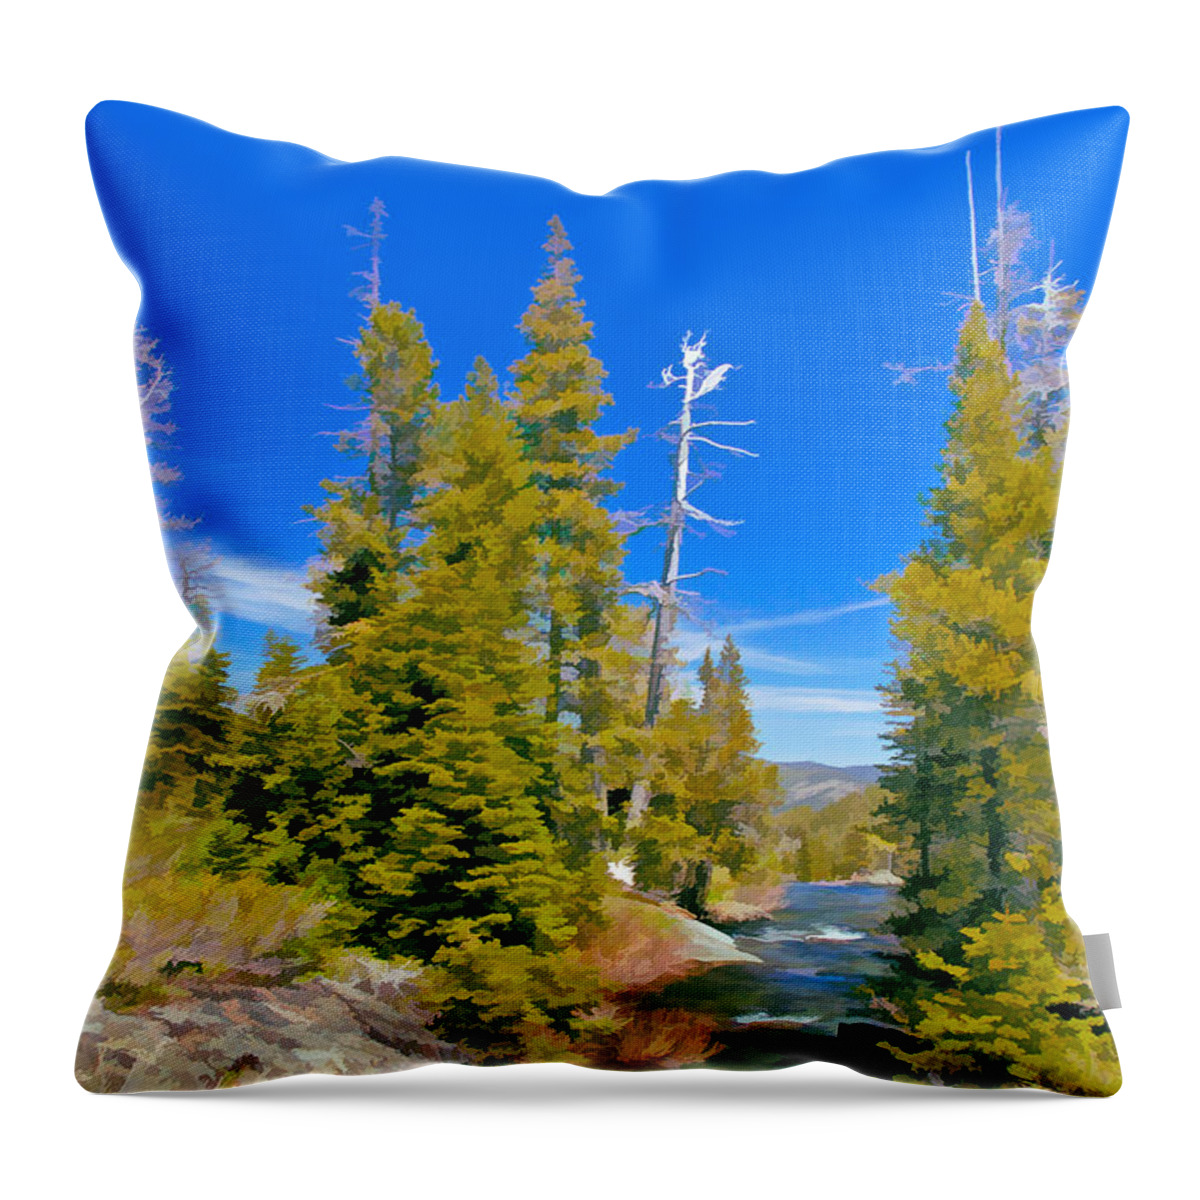 River Throw Pillow featuring the digital art Feather River by Mick Burkey